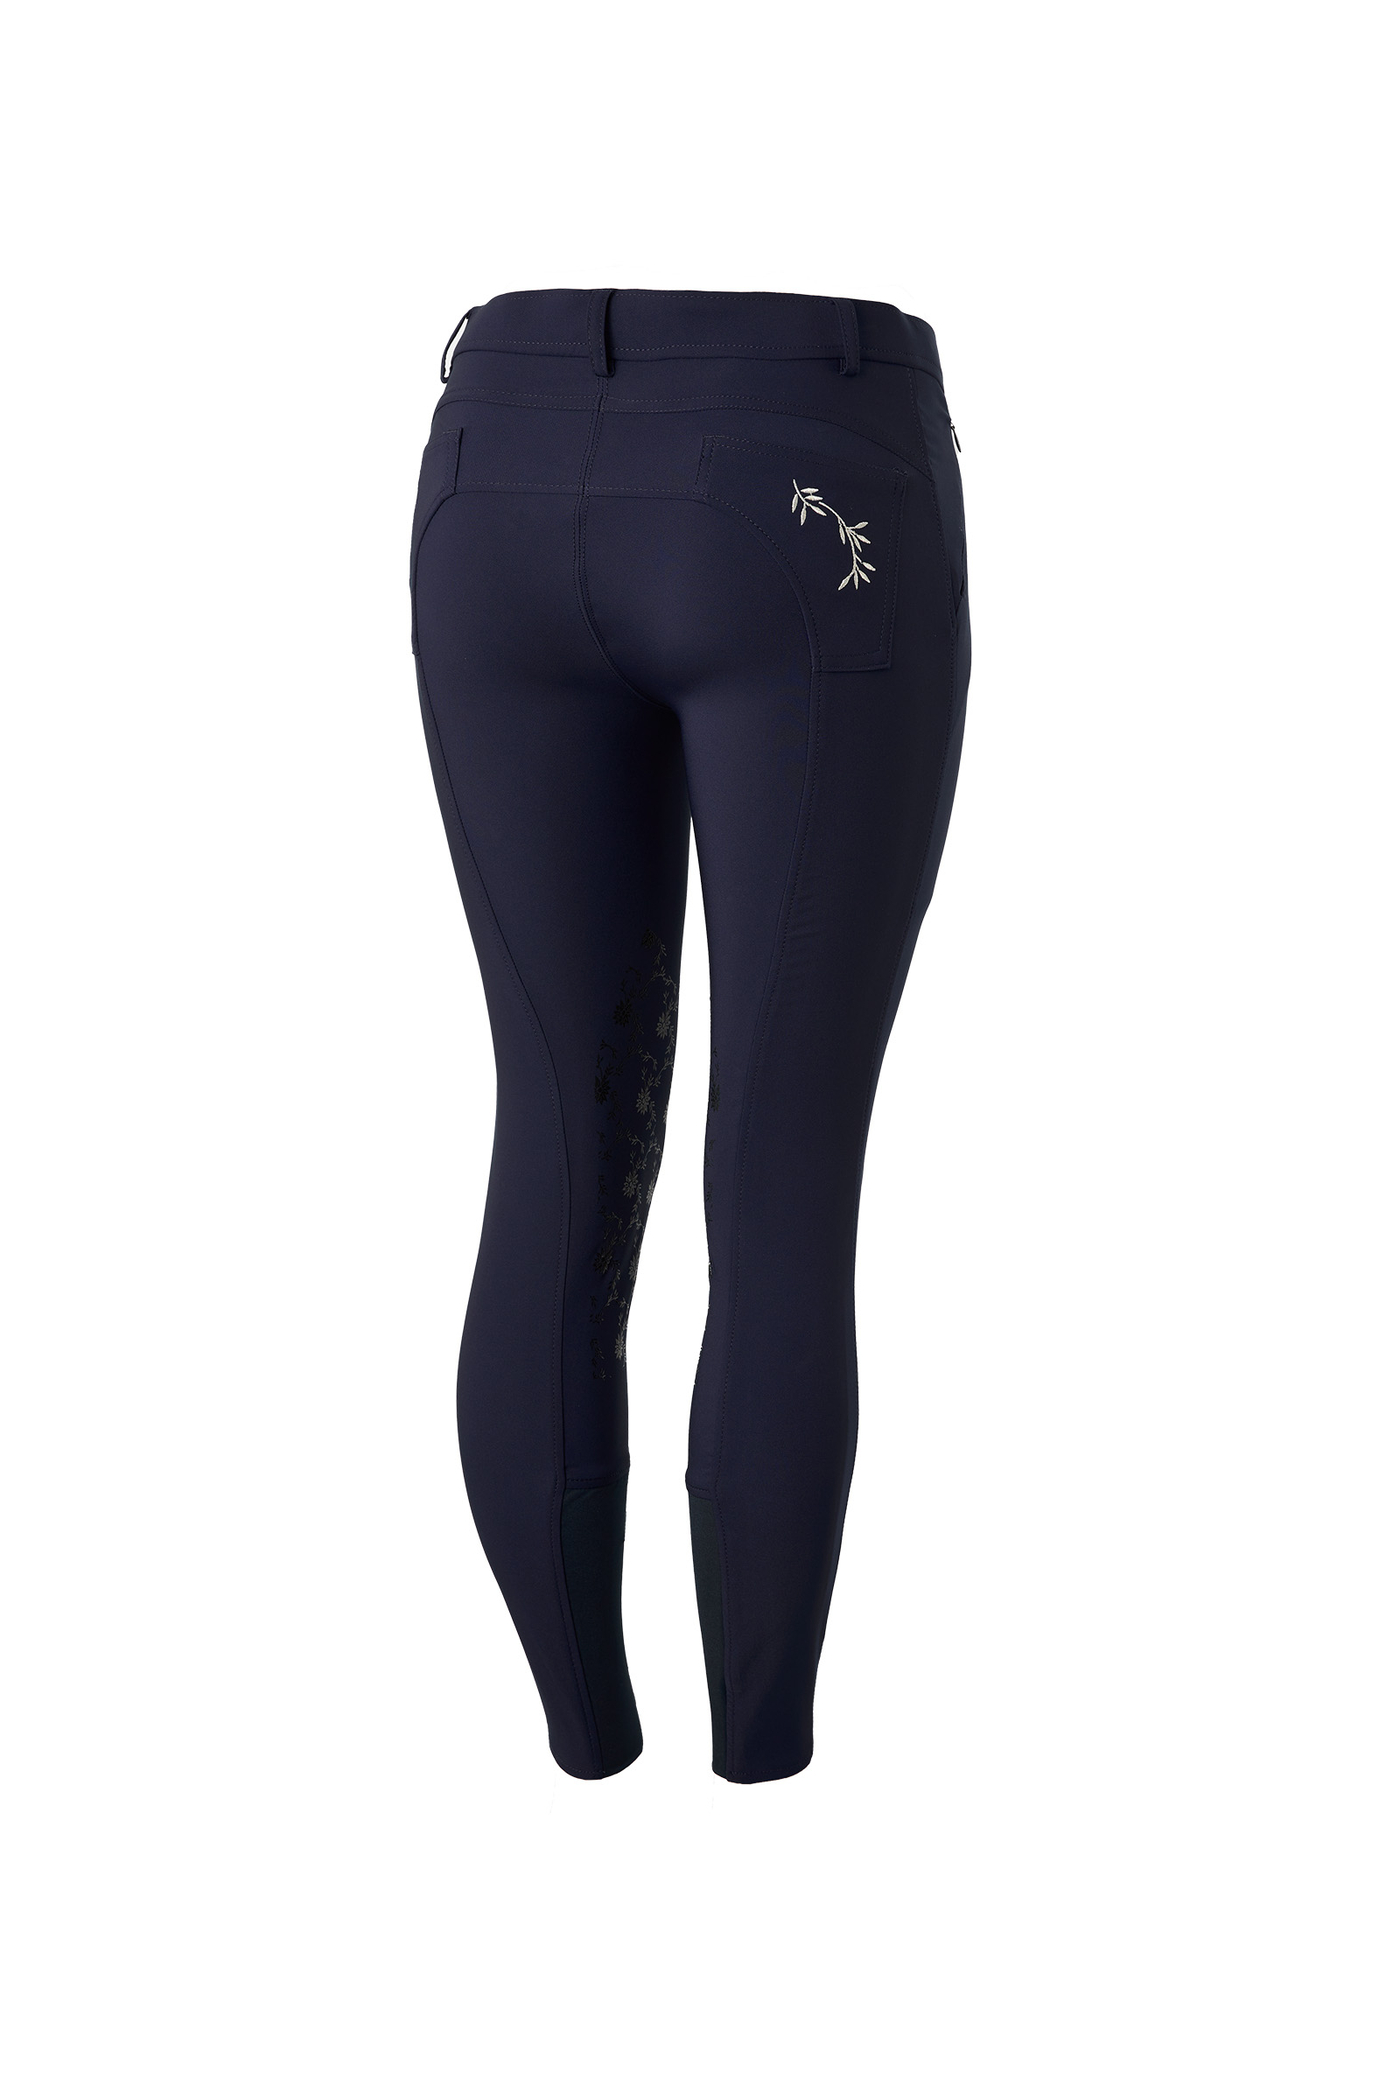 Buy Horze Kaitlin Women's Knee Patch Breeches with Flower Detail